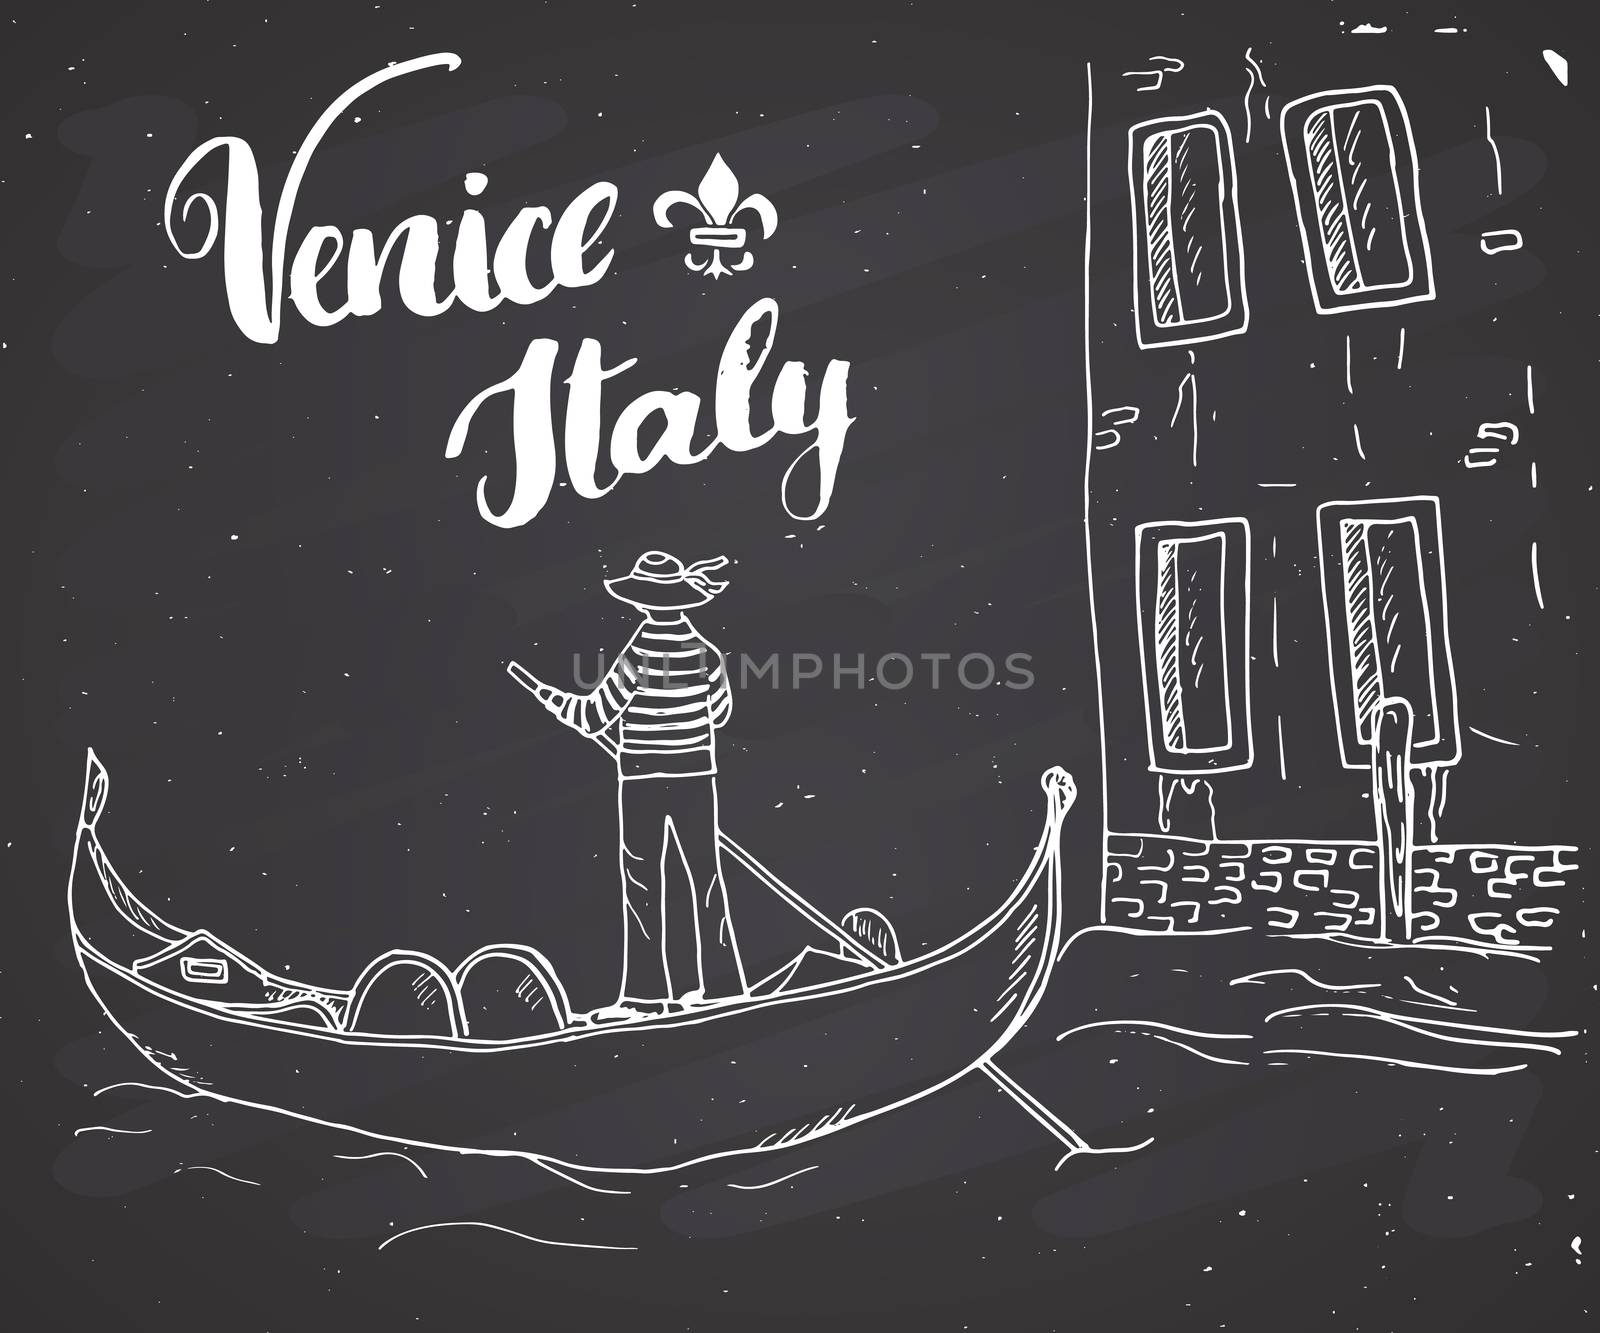 Venice Italy Hand Drawn Sketch Doodle Gondolier and lettering handwritten sign, grunge calligraphic text. Vector illustration on chalkboard background.